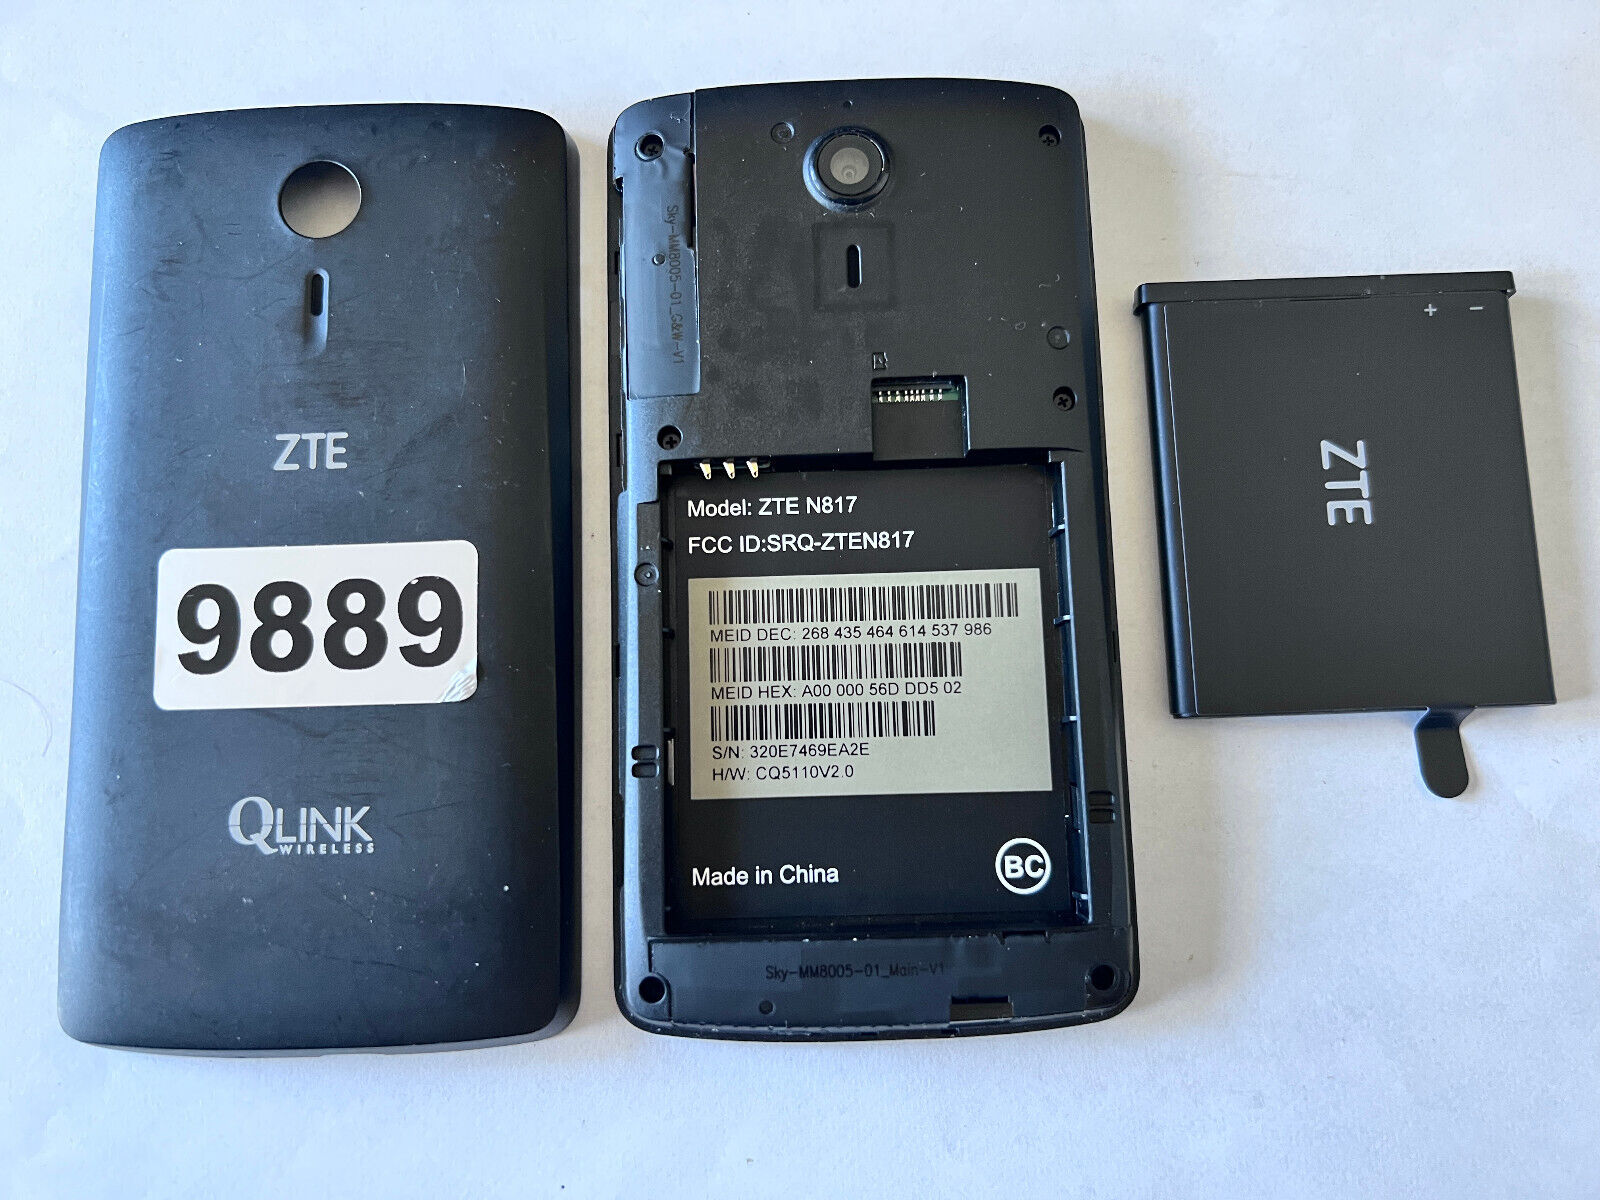 how-to-factory-reset-a-zte-qlink-wireless-phone